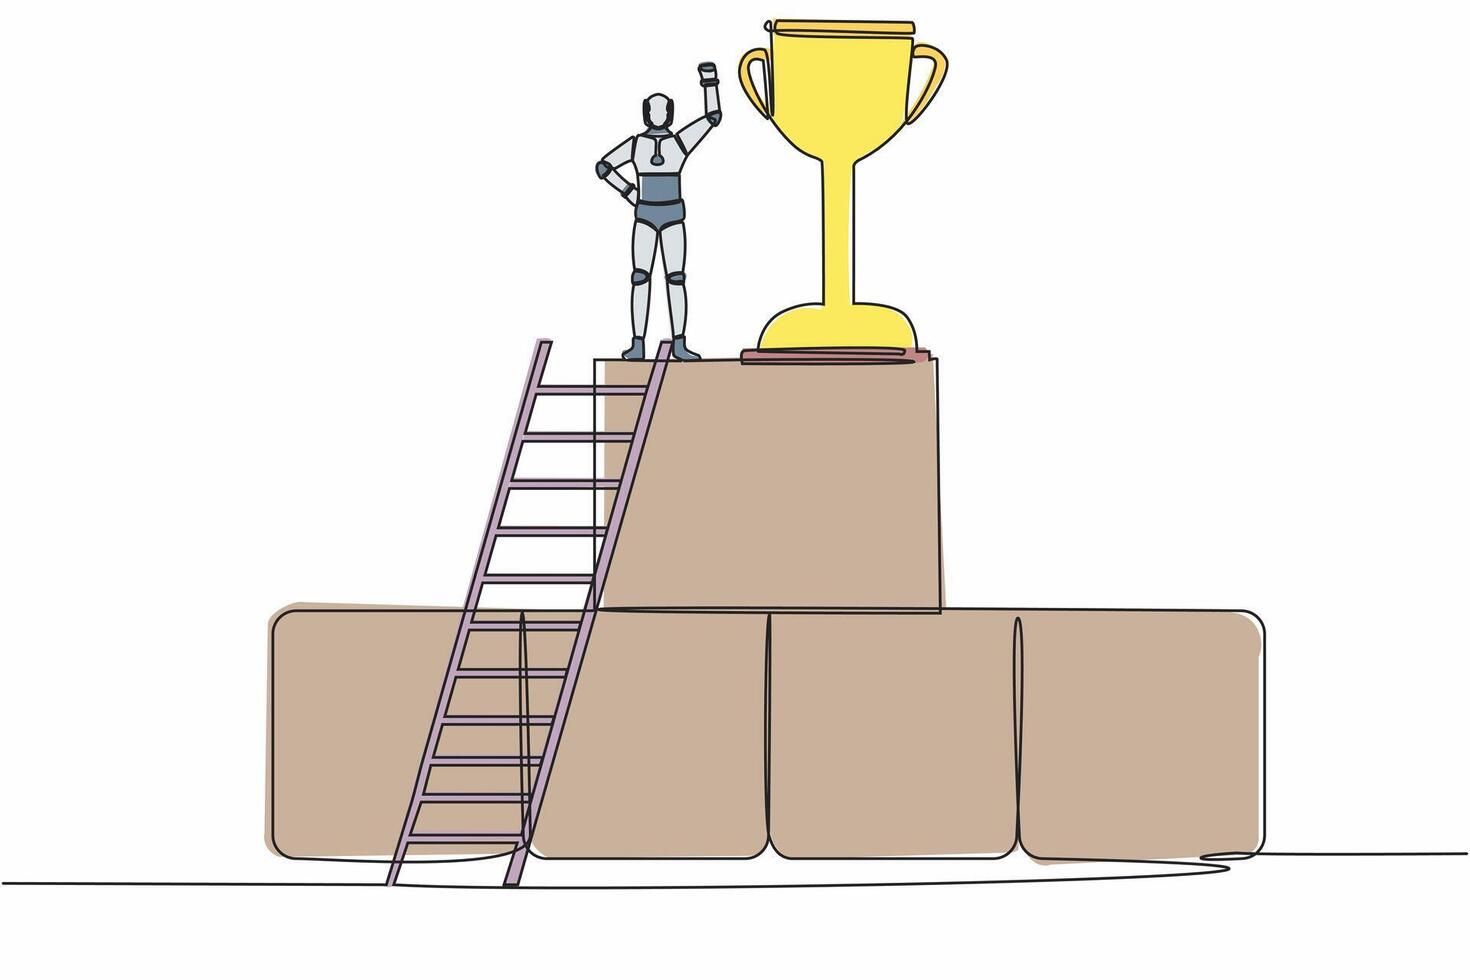 Single one line drawing robot climb ladder and standing with fist up gesture on big graphic bar beside huge trophy. Artificial intelligence process. Continuous line graphic design vector illustration